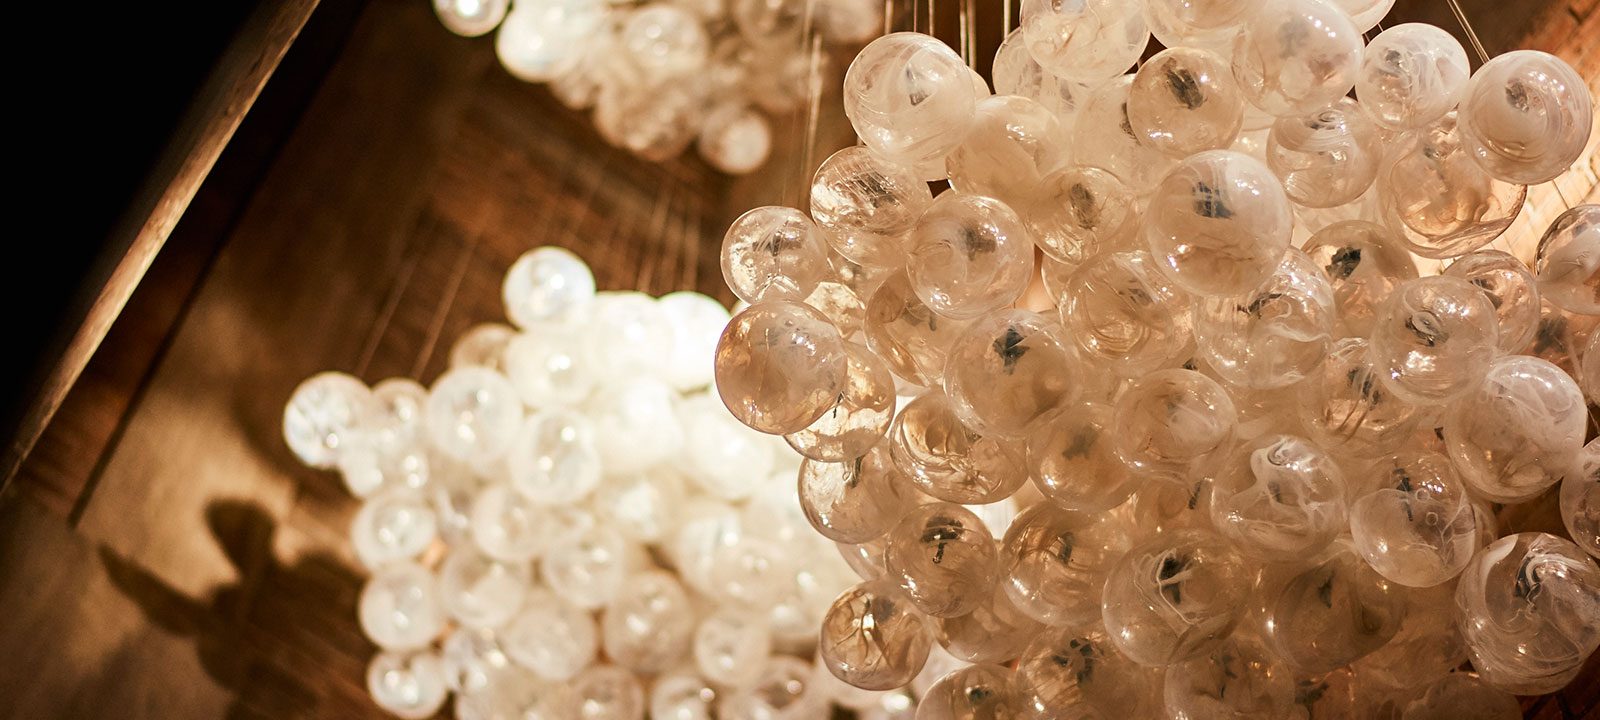 Clusters of cream-colored glass bubbles on the ceiling at our Detroit hotel